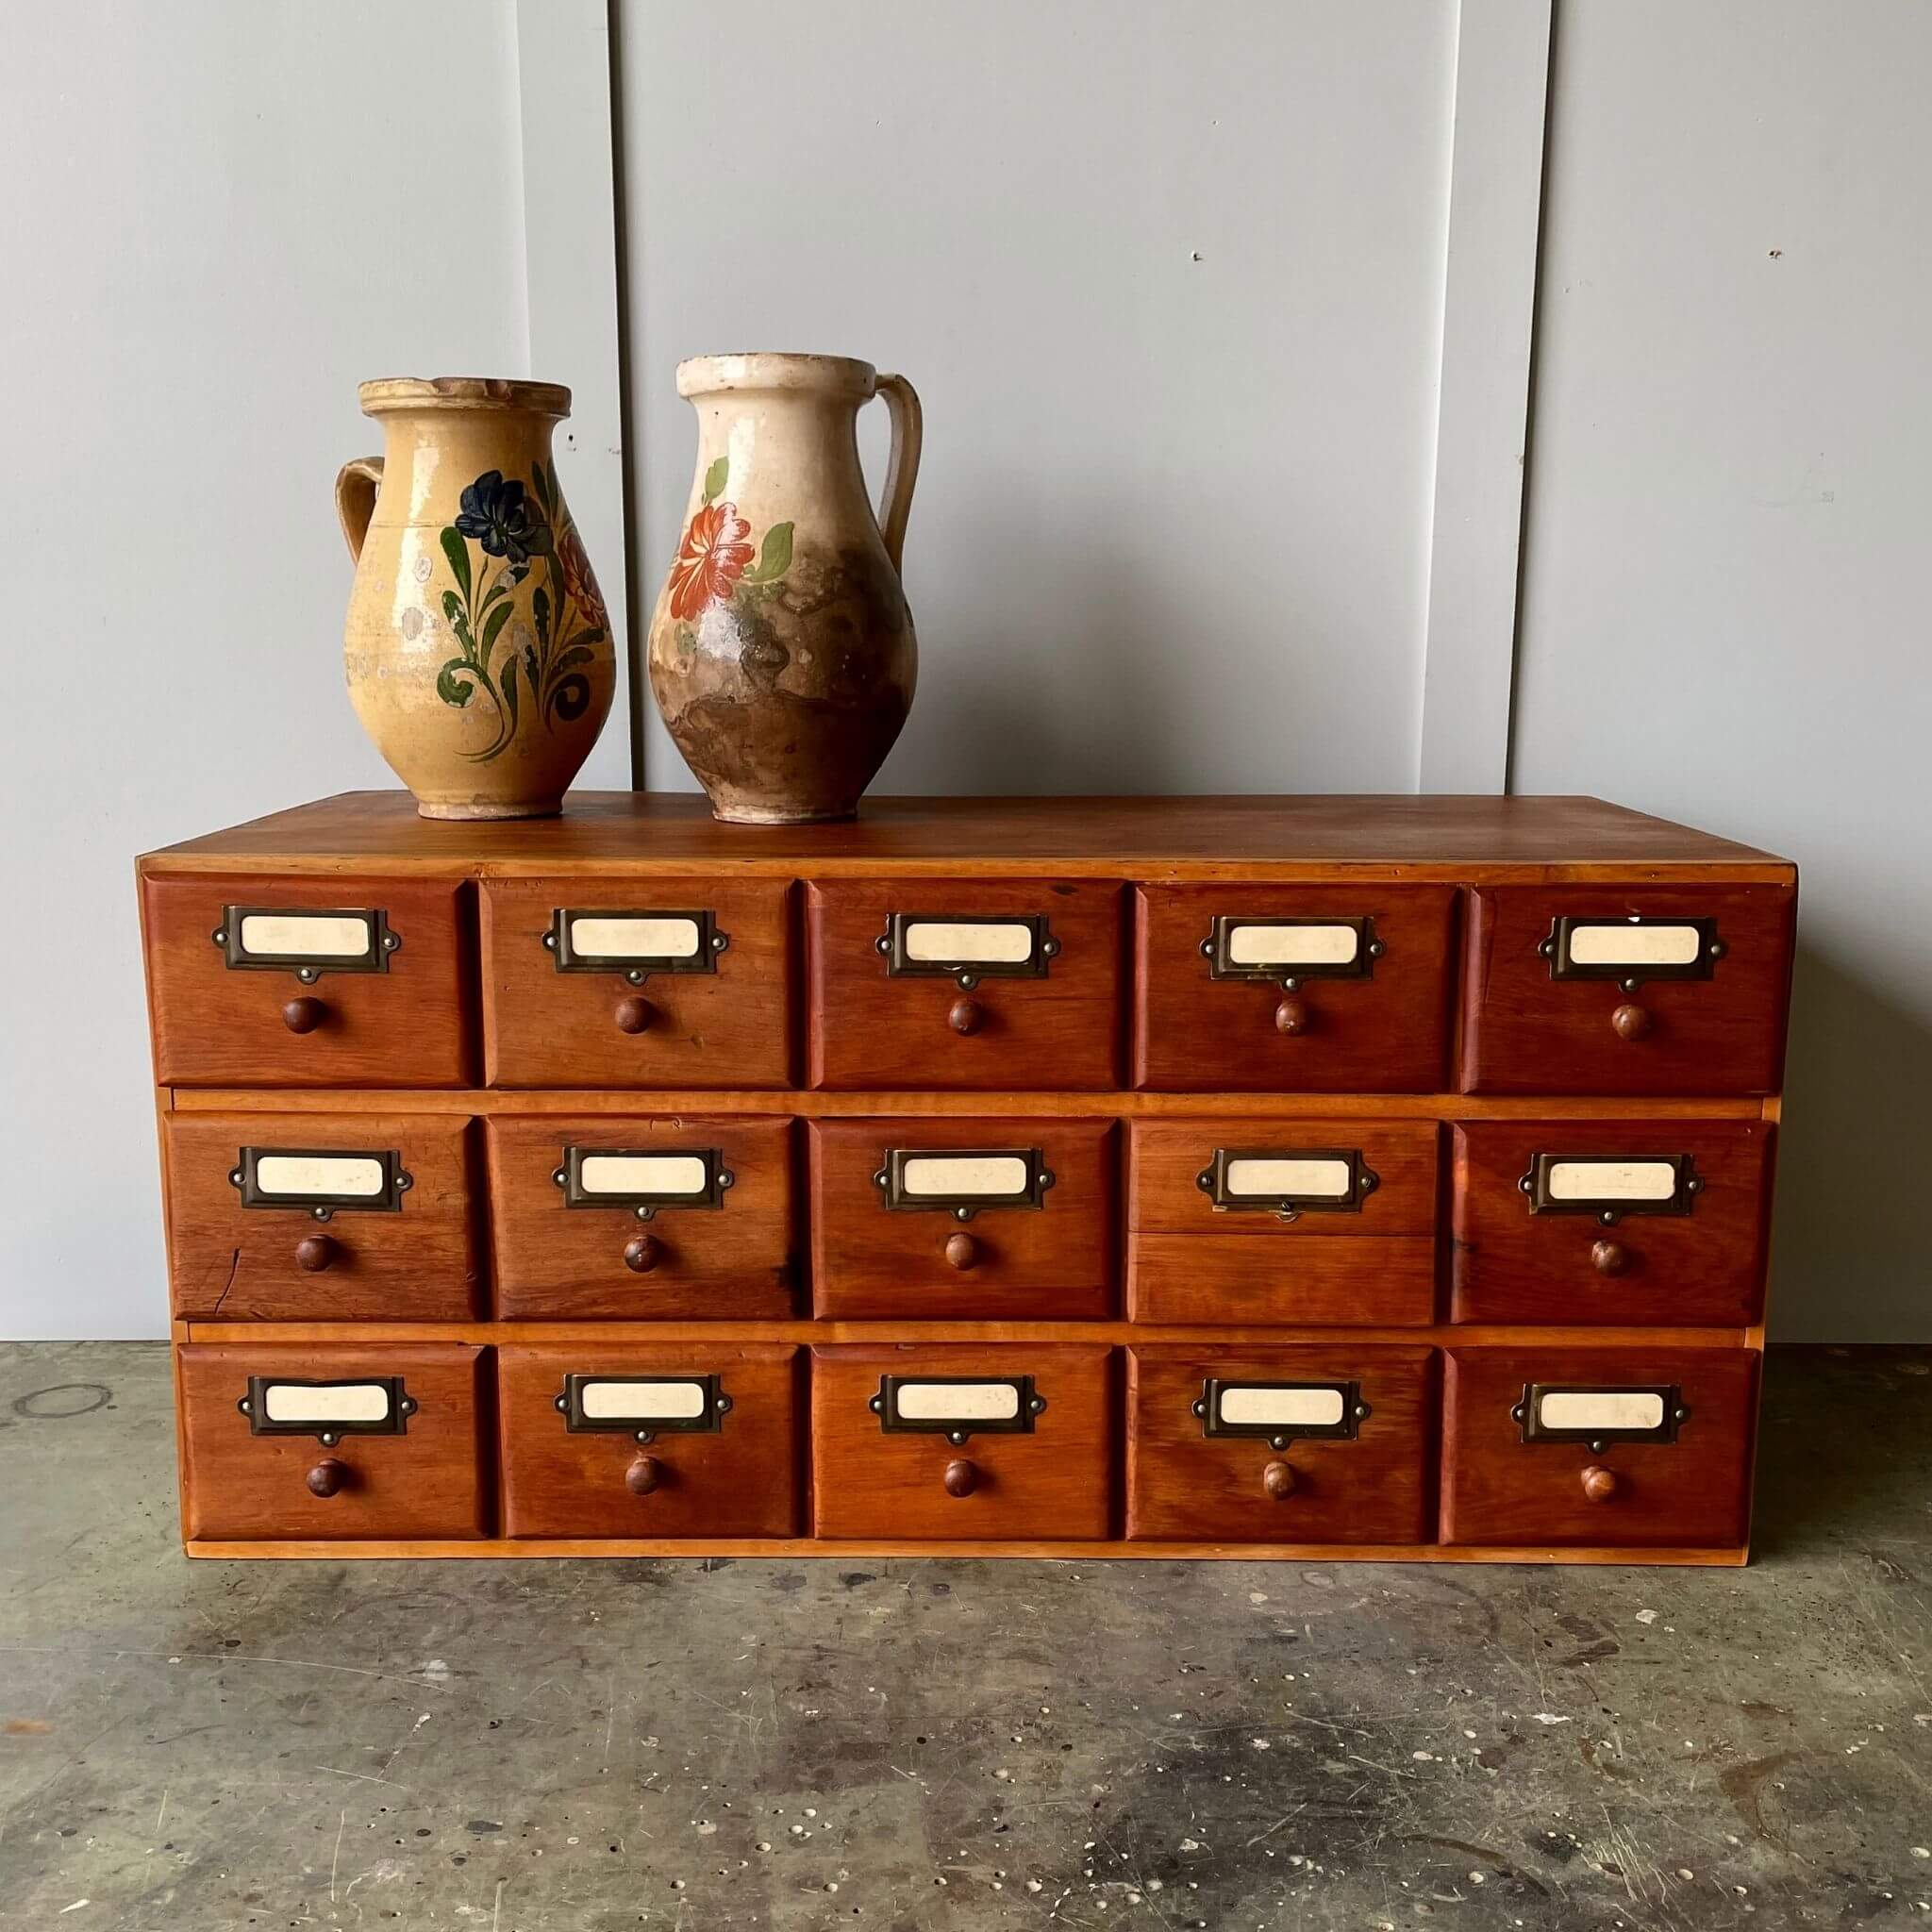 Vintage industrial bank of draws for home decor